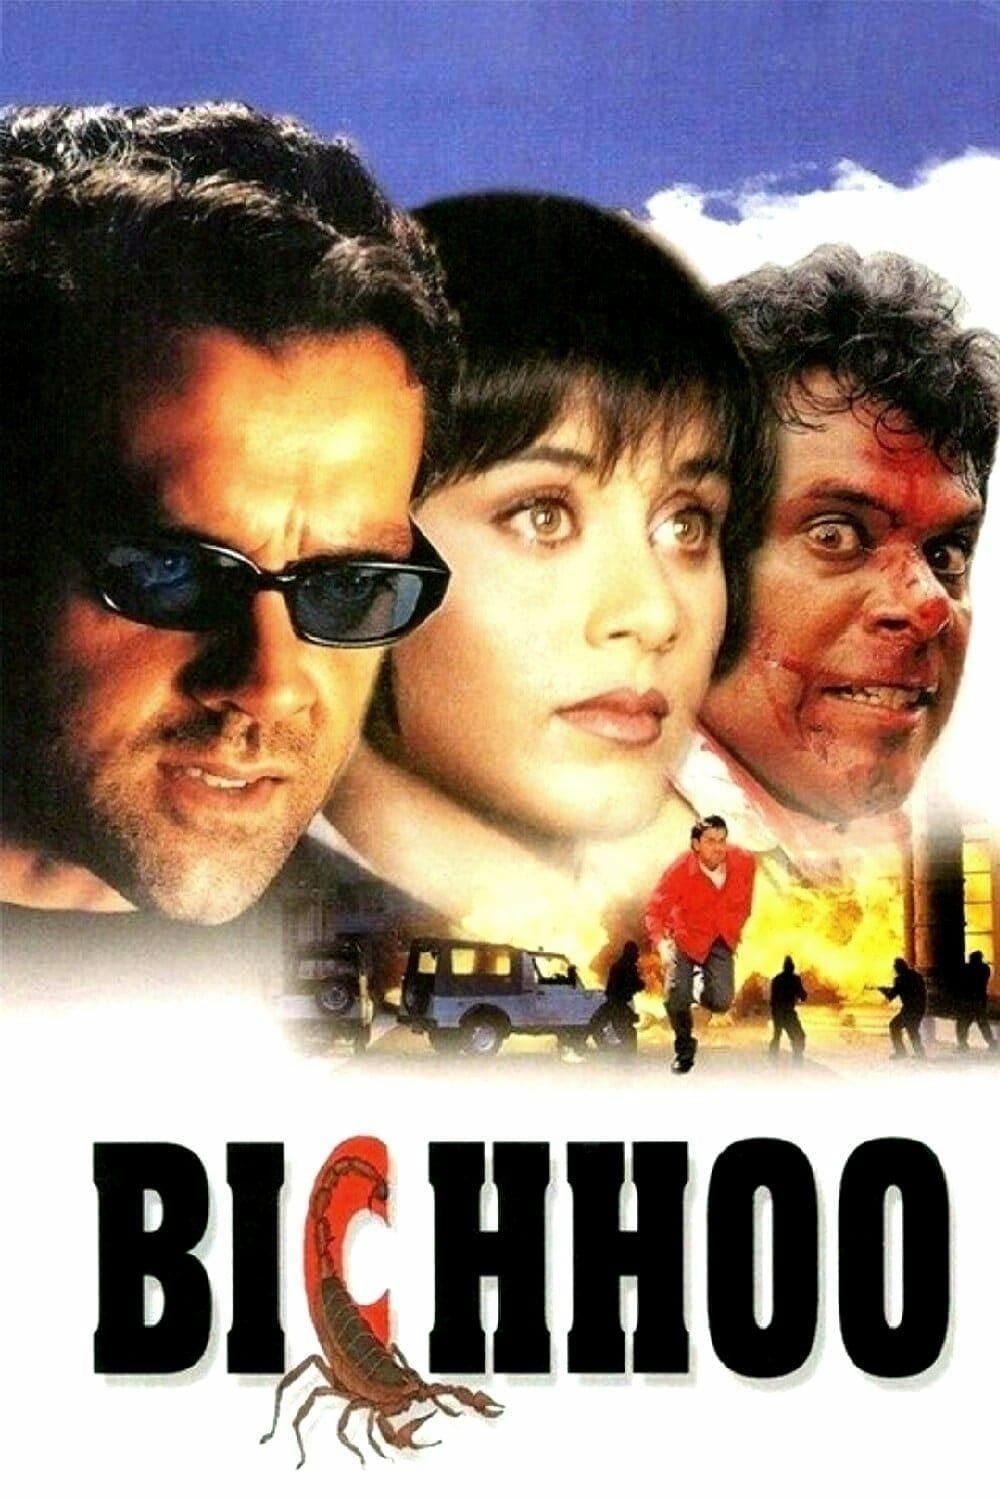 Poster for the movie "Bichhoo"